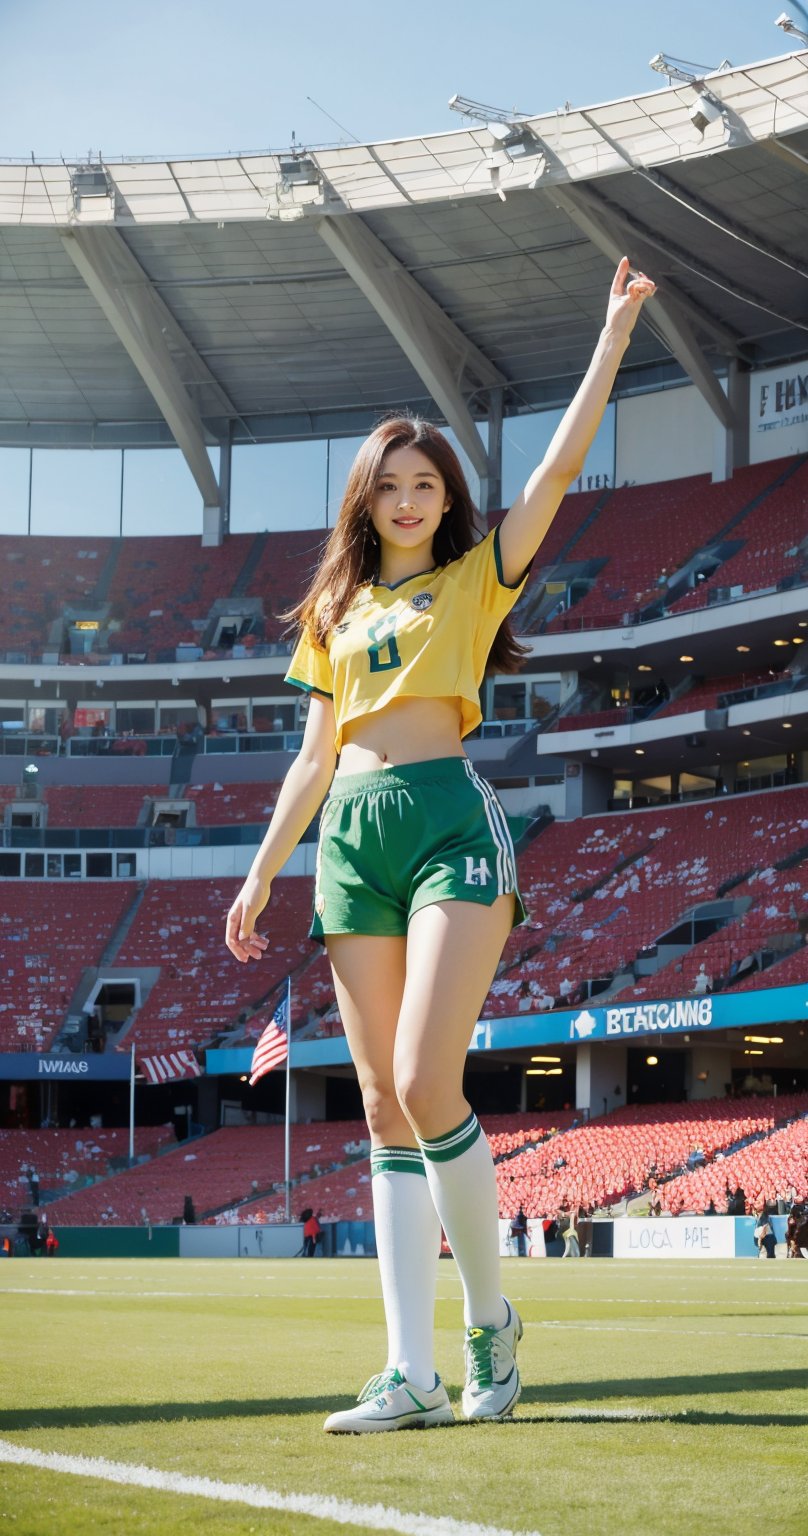 In the middle of a vast, brightly lit stadium, a girl stands out in her Brazilian national team football uniform. She wears the traditional yellow jersey with green trim, the team logo and number prominently displayed on her chest. The jersey fits snugly, highlighting her athletic and dynamic figure. Her shorts are green, paired with white socks and white football boots featuring green stripes.

The girl sits comfortably on a football, her left leg slightly bent with her foot touching the ground while her right leg is extended, resting on the ball. Her long hair falls naturally, with a few strands gently swaying in the breeze. Her face is lit up with a radiant smile, her bright eyes reflecting joy and excitement.

Surrounding her is the expansive stadium with towering stands, rows of seats stretching out, and colorful flags waving in the wind. Bathed in golden sunlight, the girl and the football seem to be the center of this small universe, exuding a sense of vitality and passion for the sport.from below 